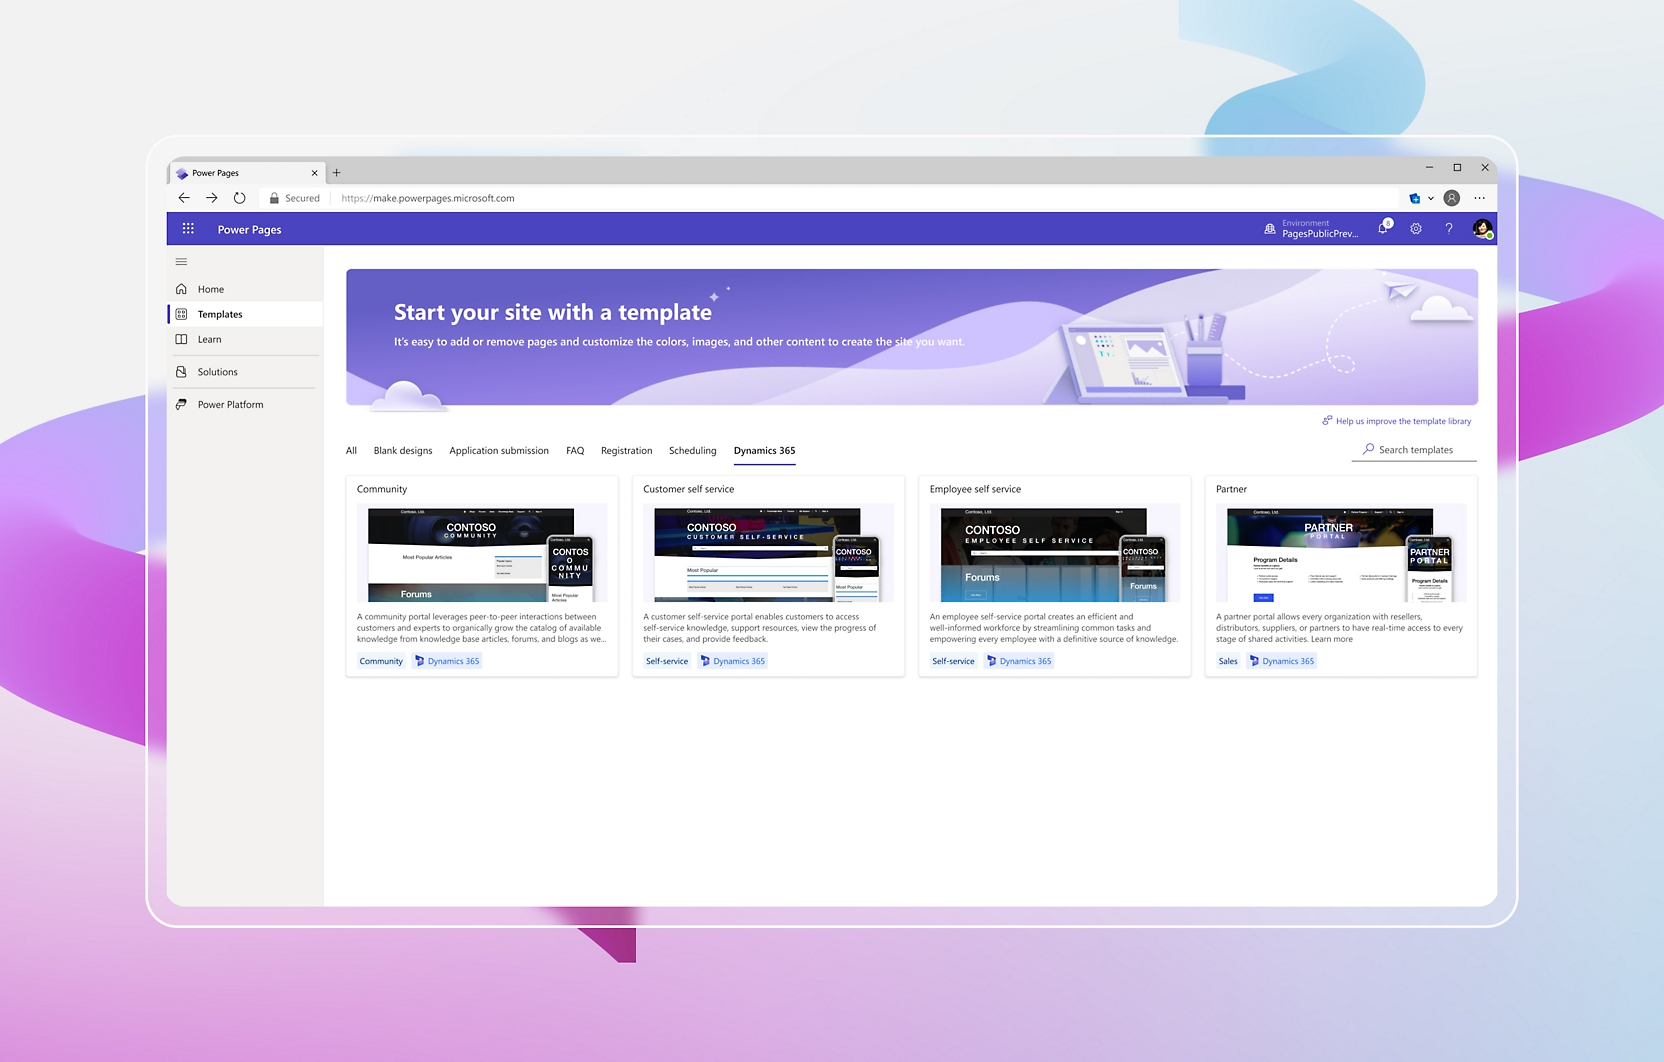 The homepage of a website with a purple background